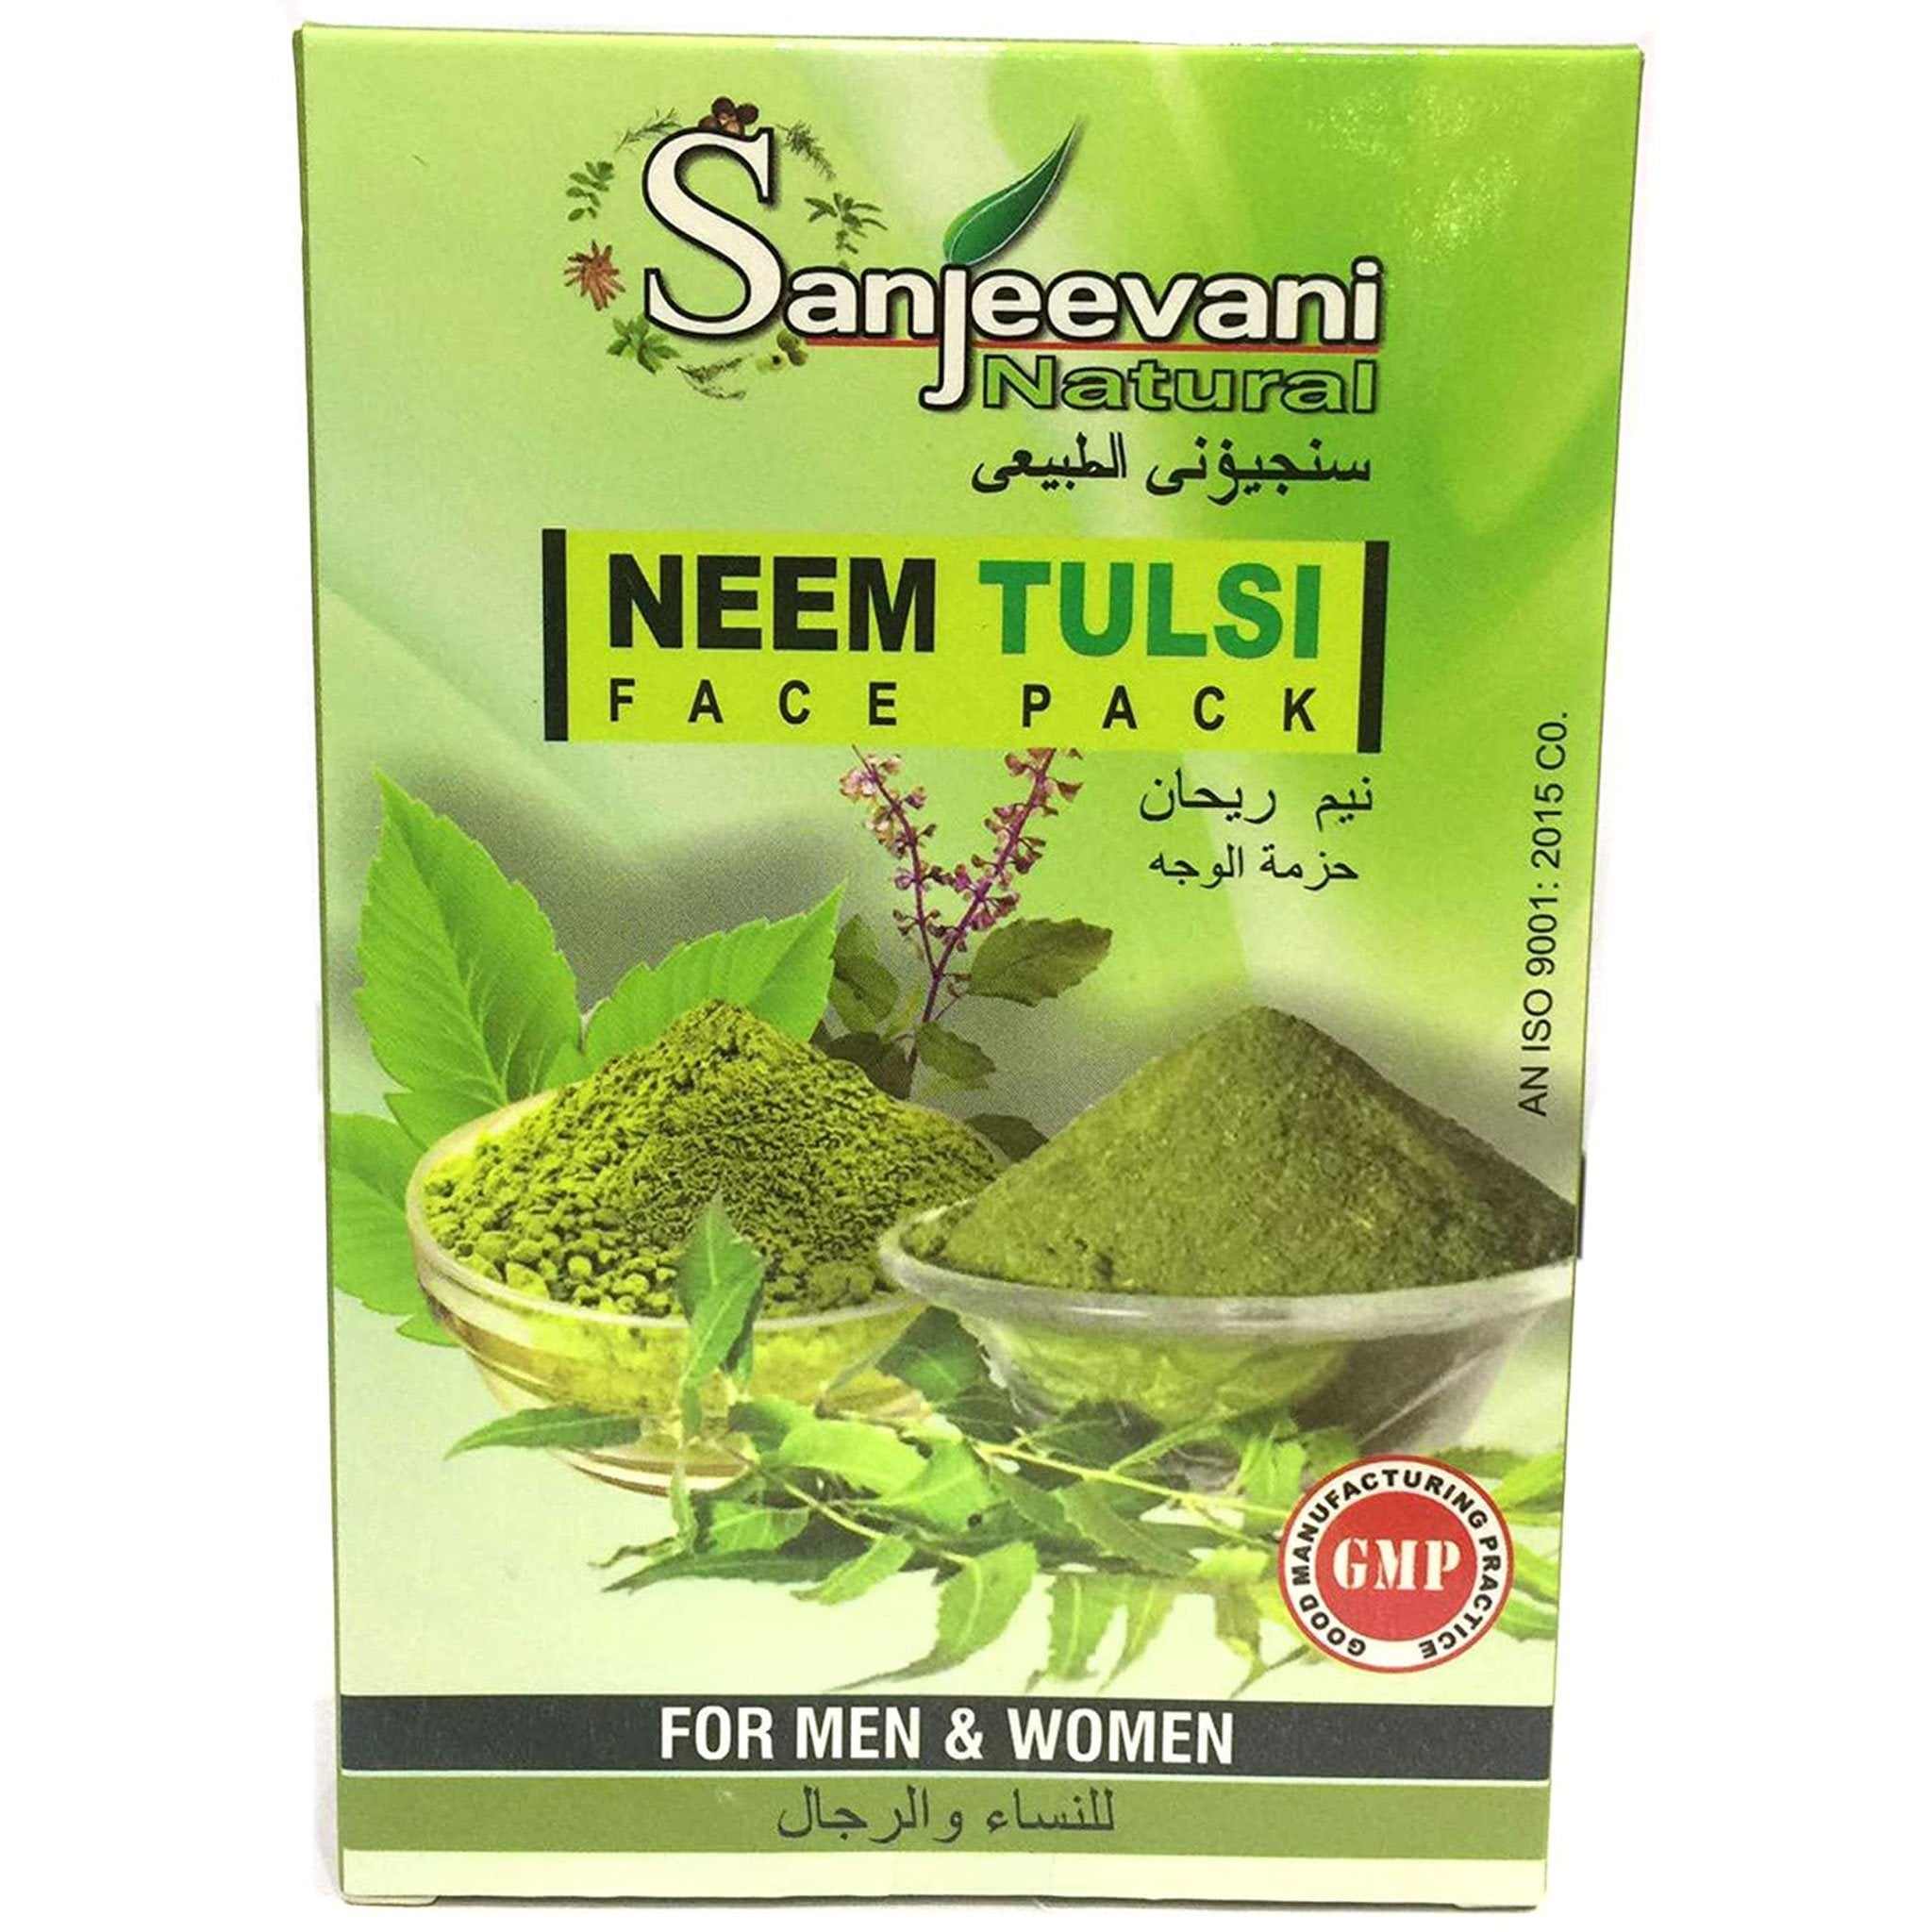 Sanjeevani Natural Neem Tulsi Face Pack 1box4x25g  For men and women Value Pack of 4 